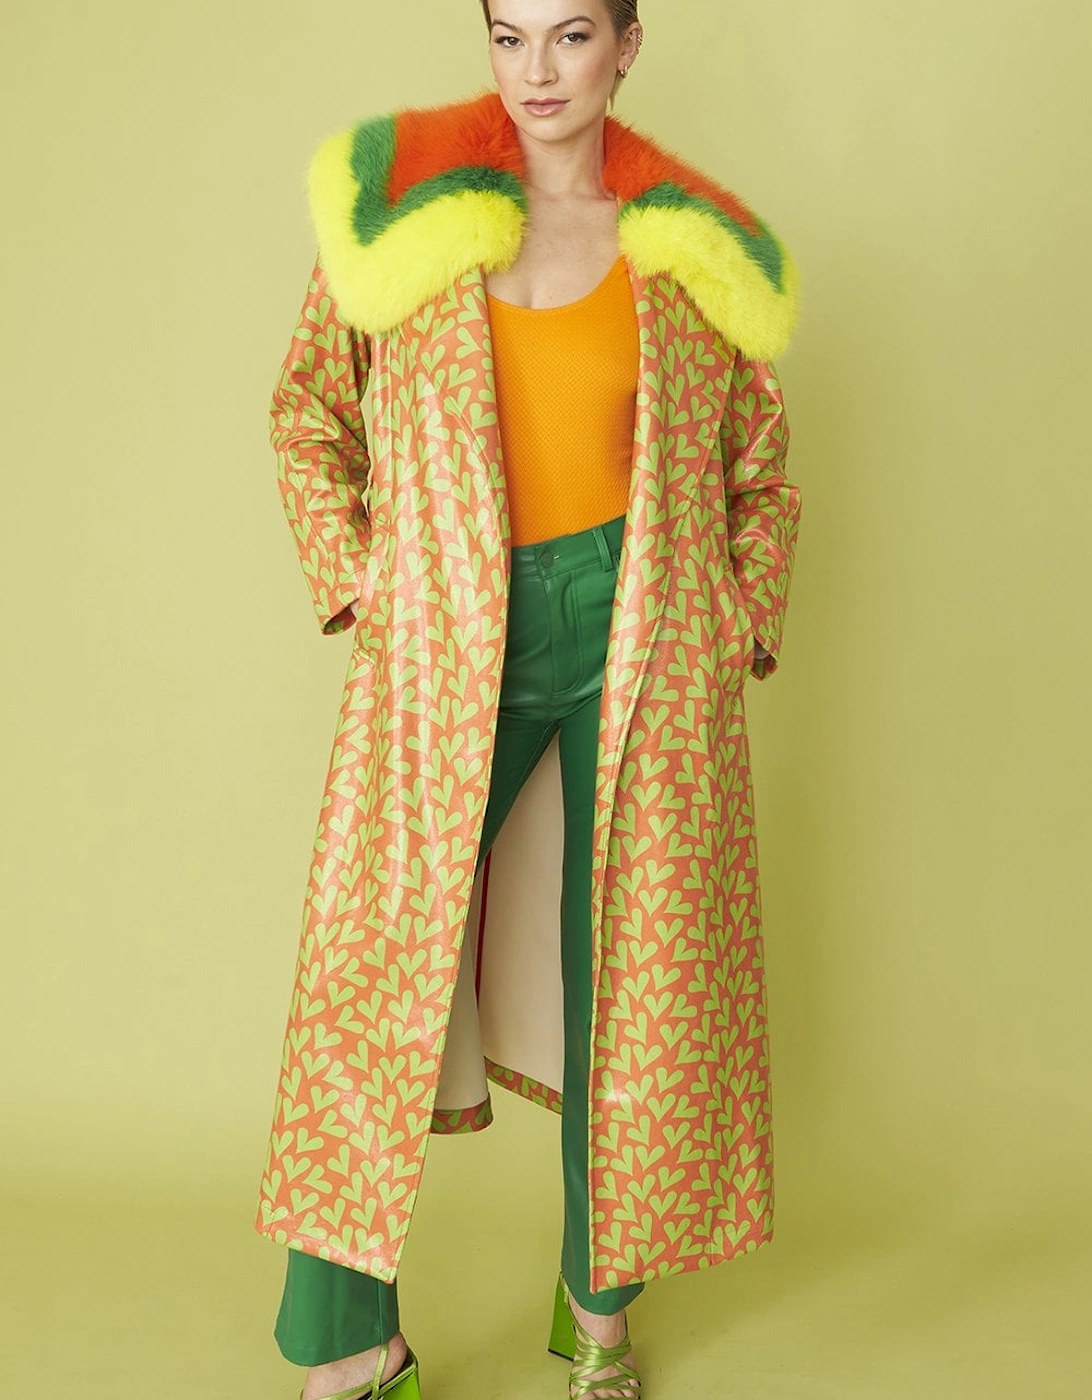 Orange and Green Love Heart Trench Coat with Oversized Faux Fur Collar